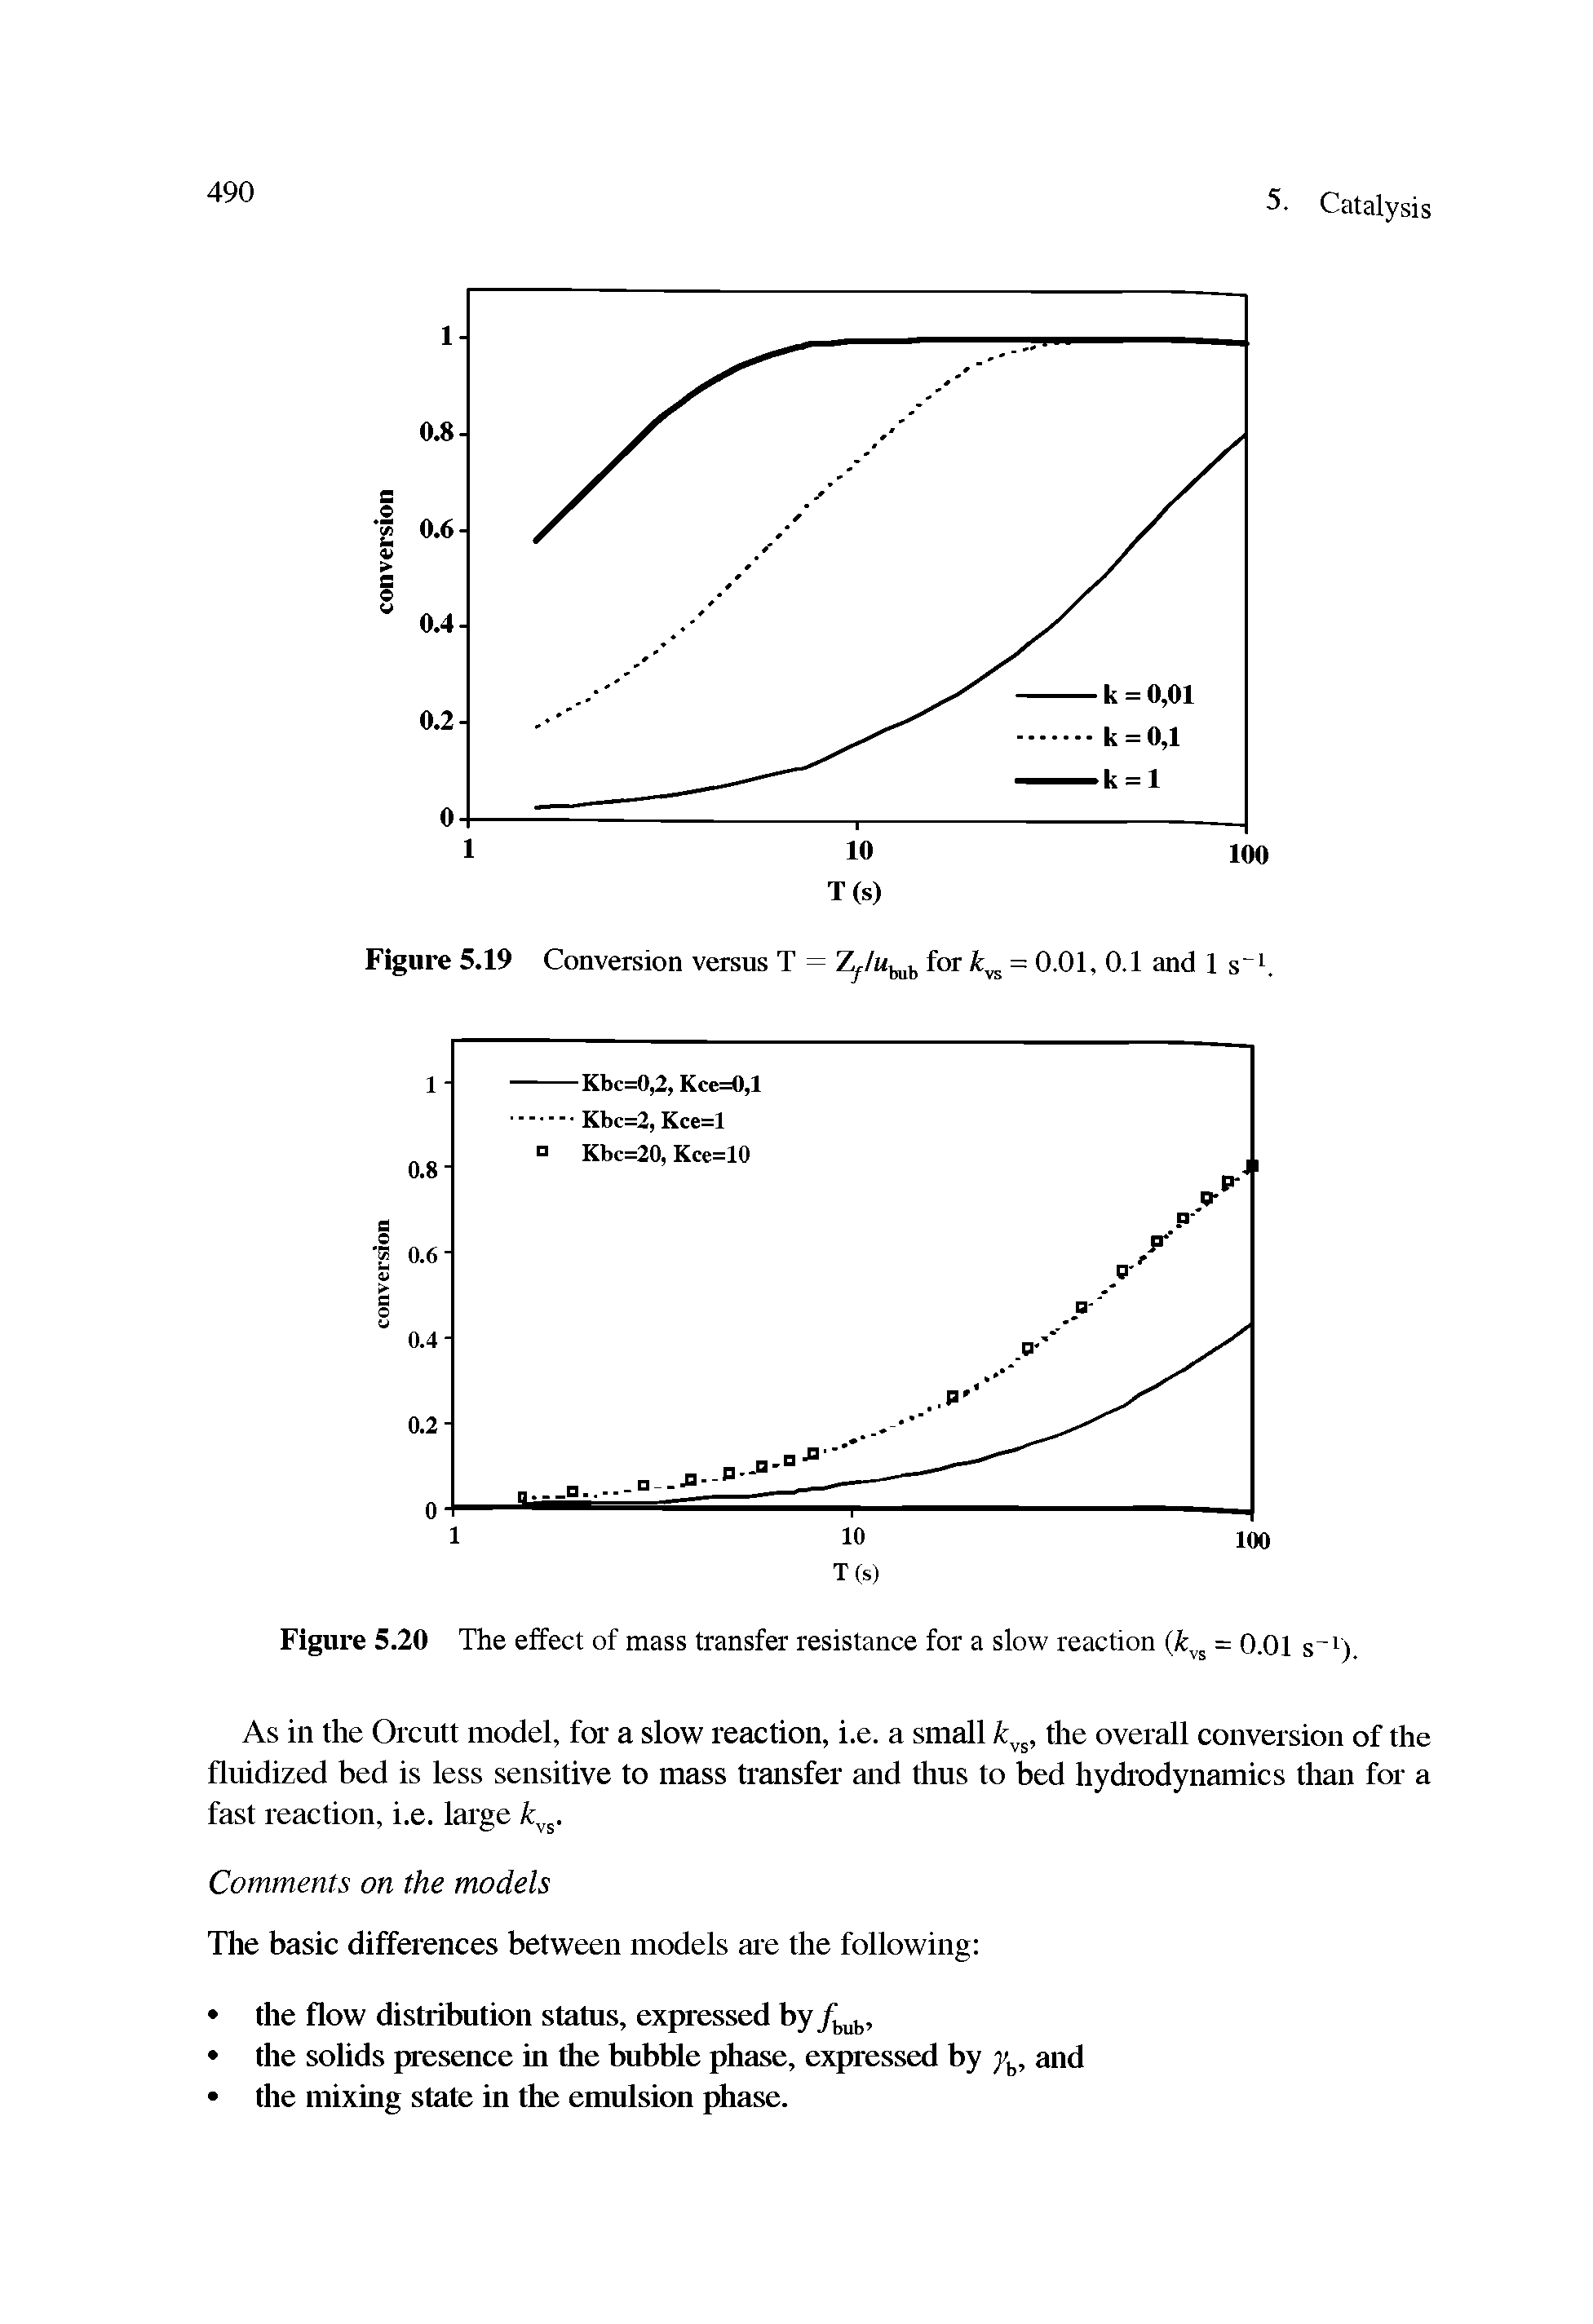 Figure 5.20 The effect of mass transfer resistance for a slow reaction ( vs = 0.01 s r).